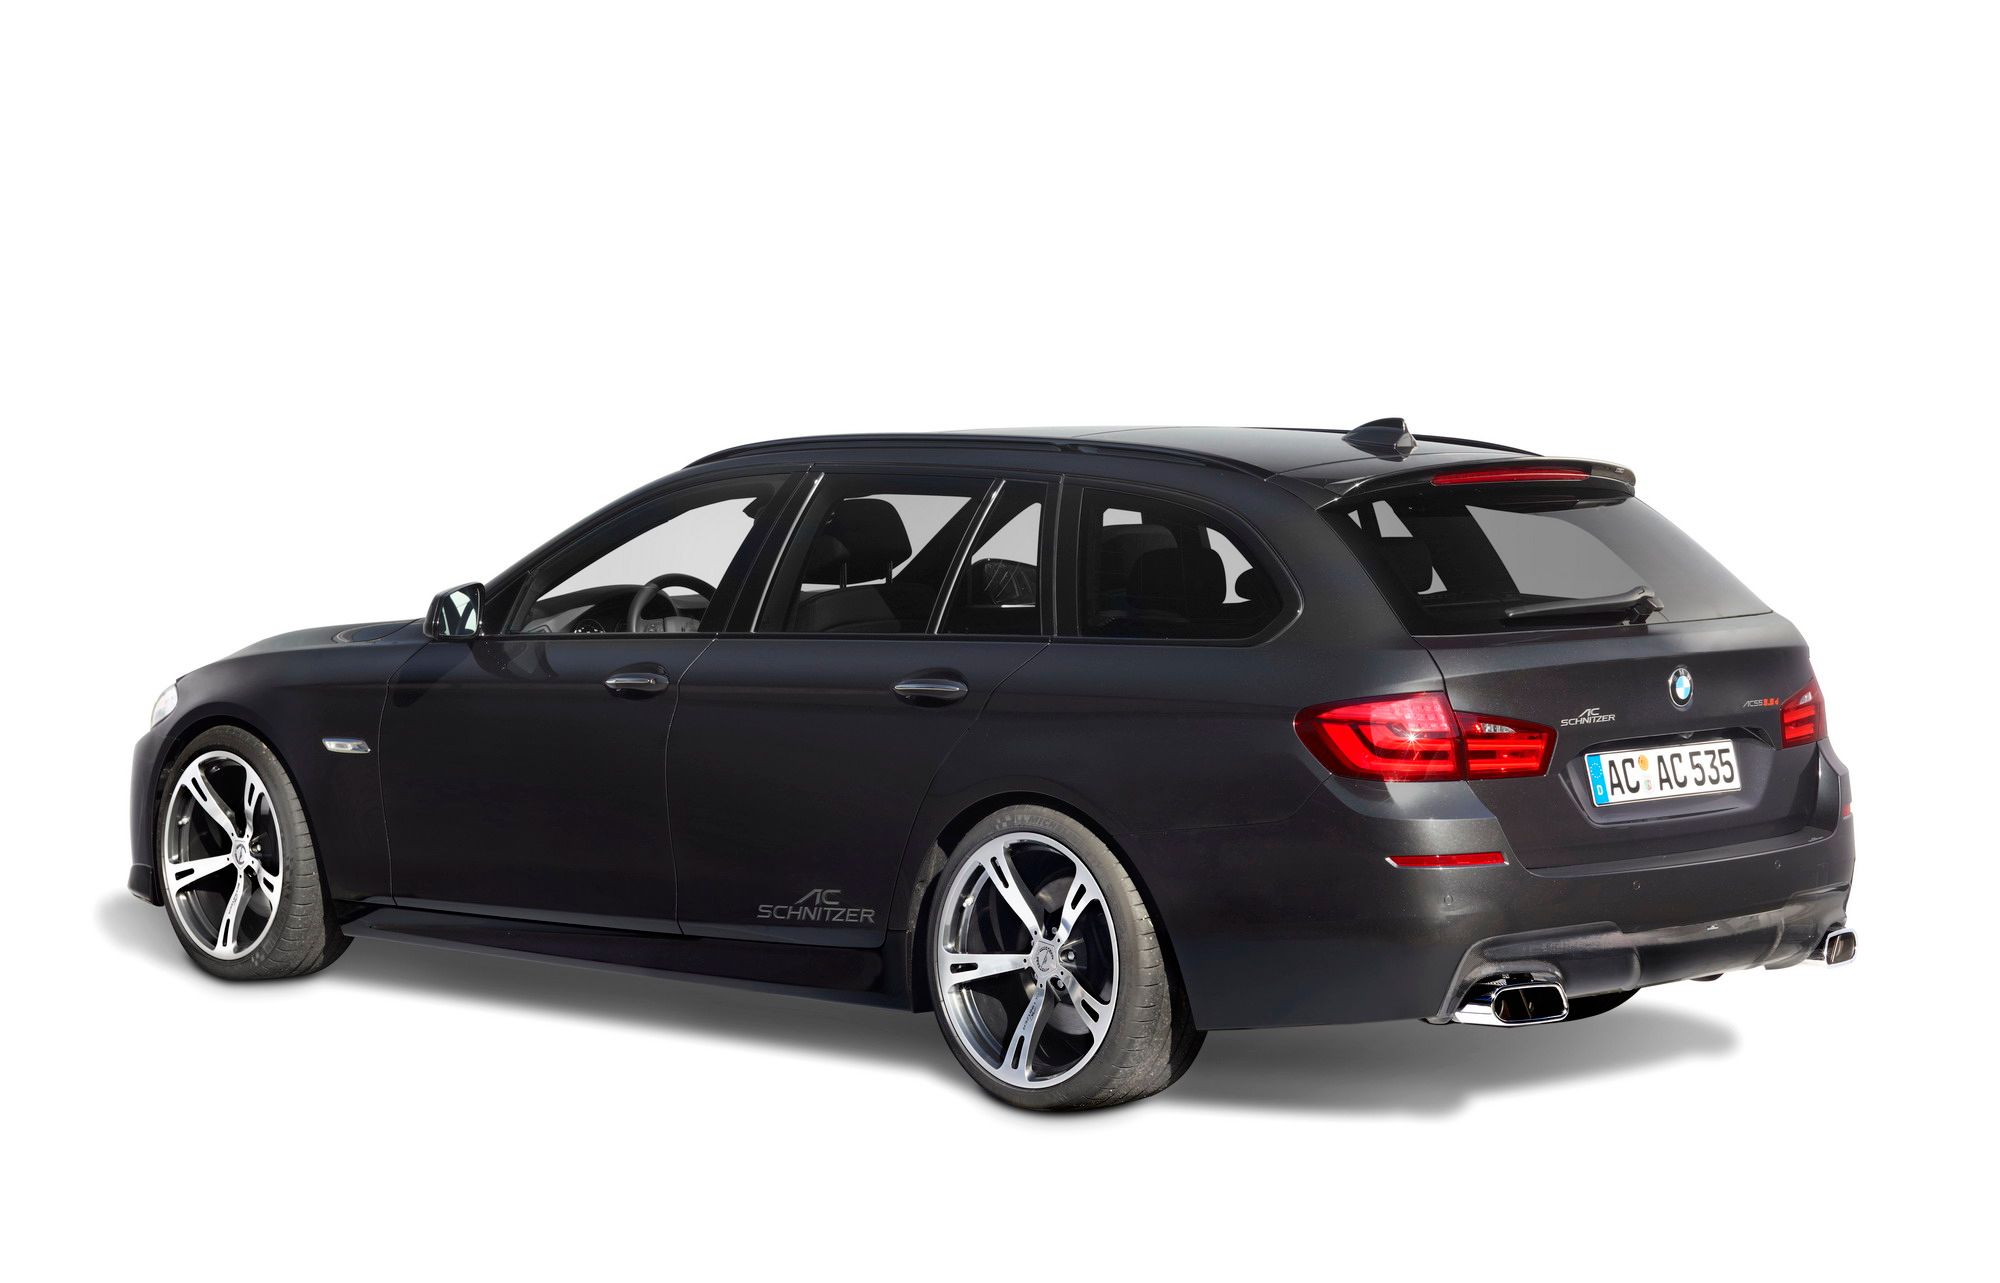 2010 BMW 5 series Touring by AC Schnitzer